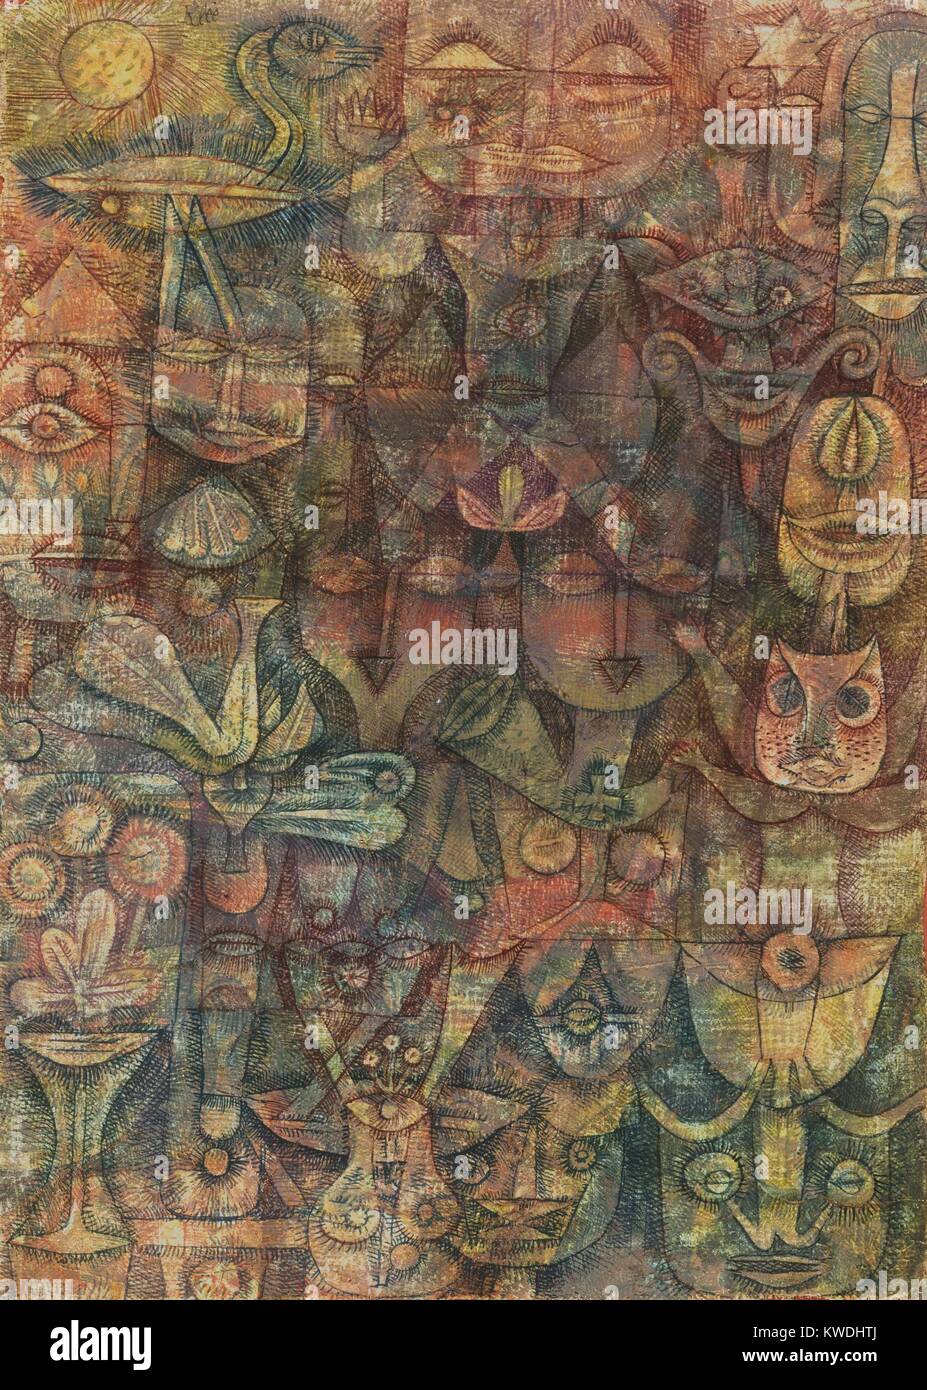 STANGE GARDEN, by Paul Klee, 1923, Swiss painting, watercolor, gouache, and ink. Human-like and animal faces, isolated facial features, and plants are drawn with line and hatching. Colors are applied in soft areas , sometimes within forms and others independent of the forms (BSLOC 2017 7 32) Stock Photo